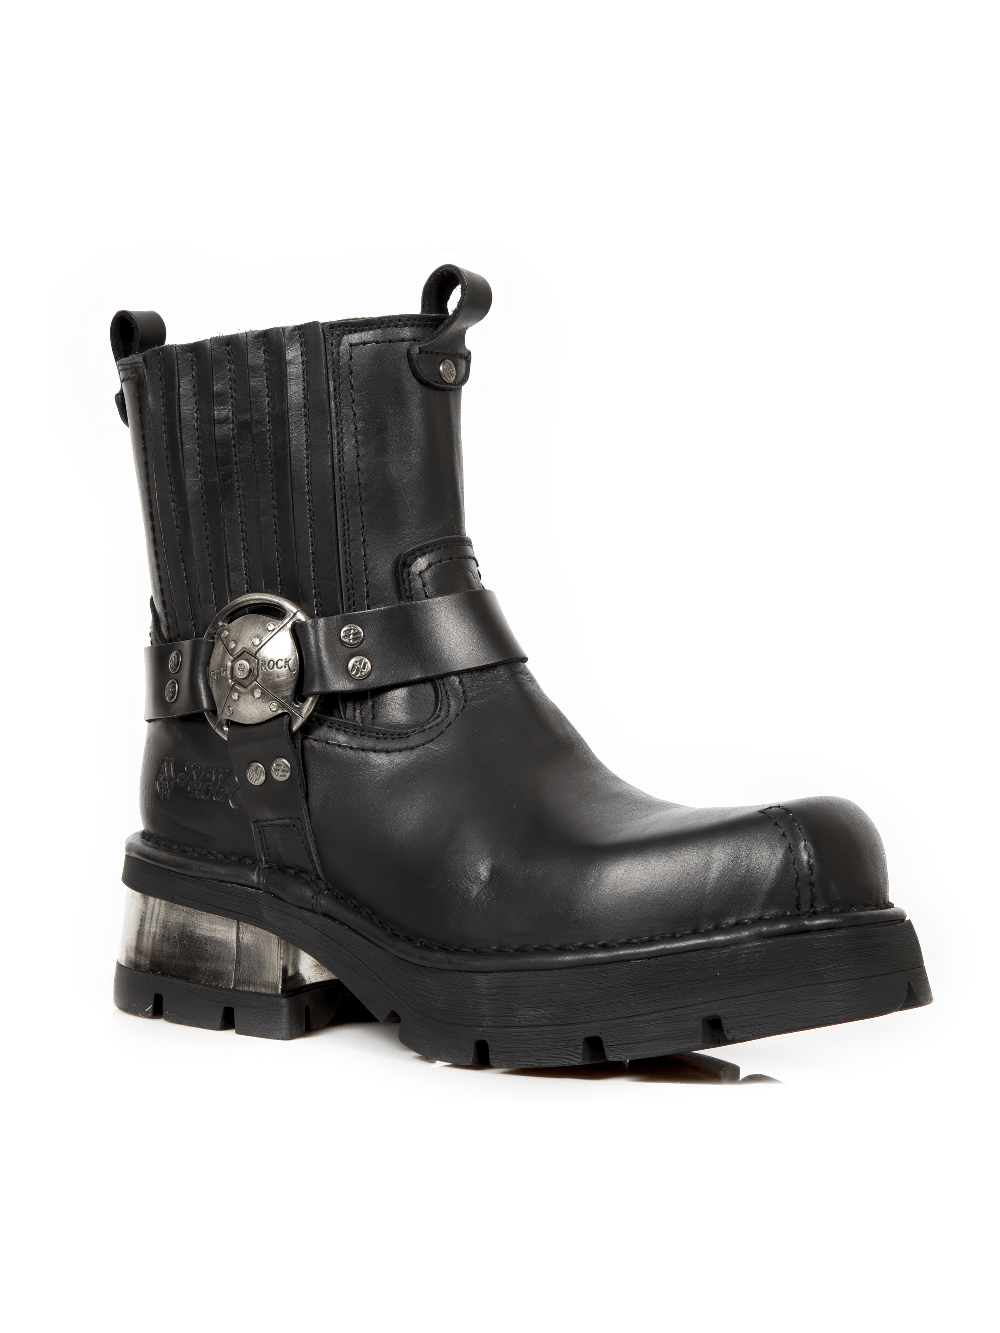 NEW ROCK Biker Style Black Leather Ankle Boots